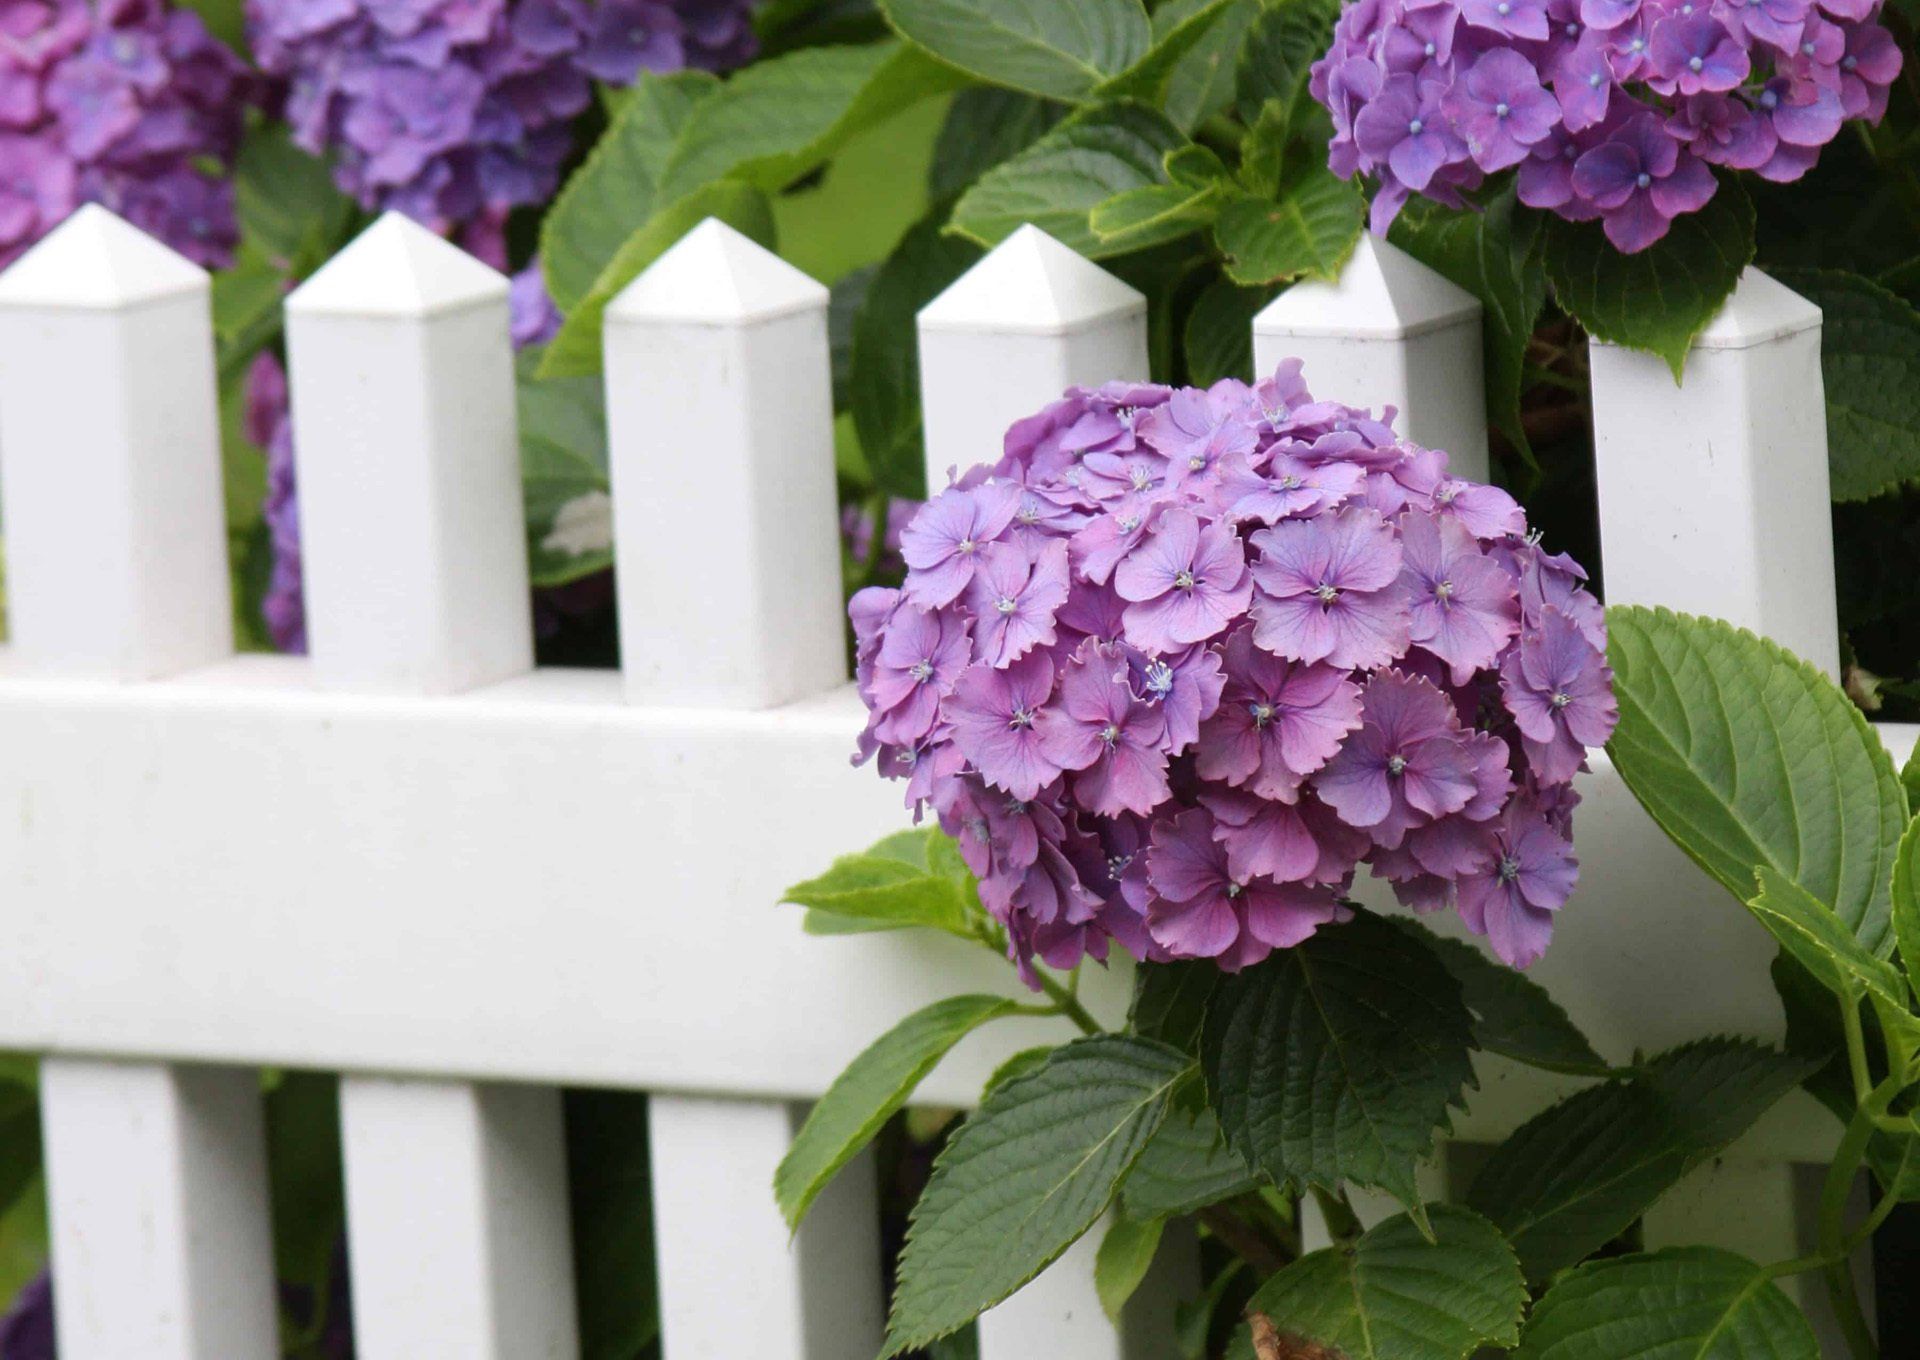 Vinyl fence is a low maintenance fencing solution